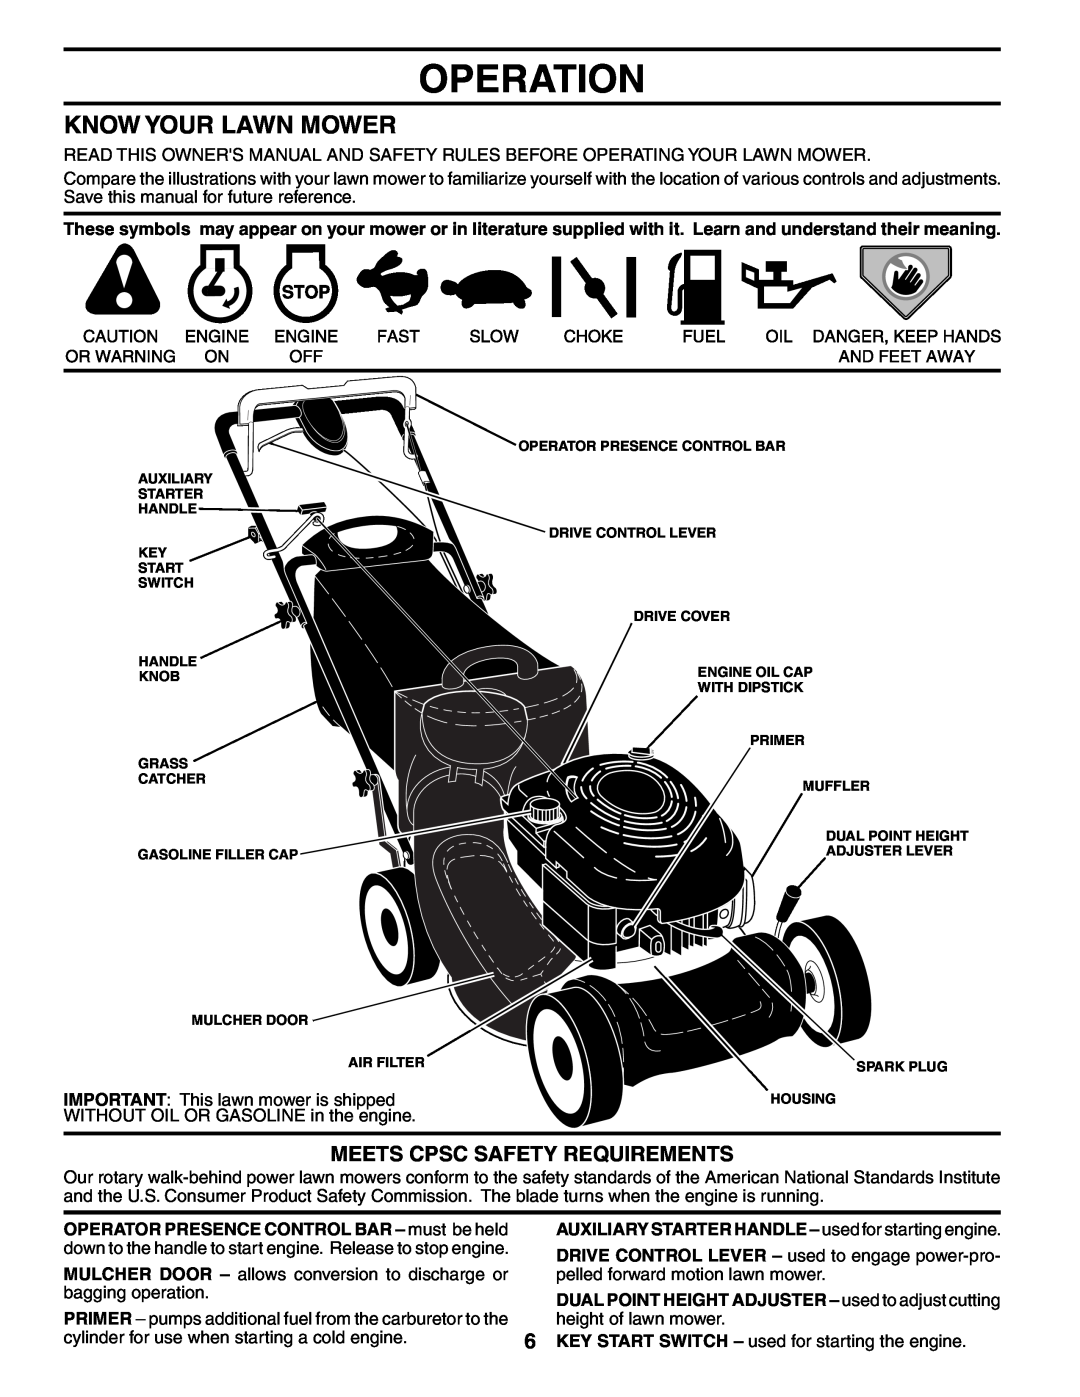 Husqvarna 67521HVE owner manual Operation, Know Your Lawn Mower, Meets Cpsc Safety Requirements 